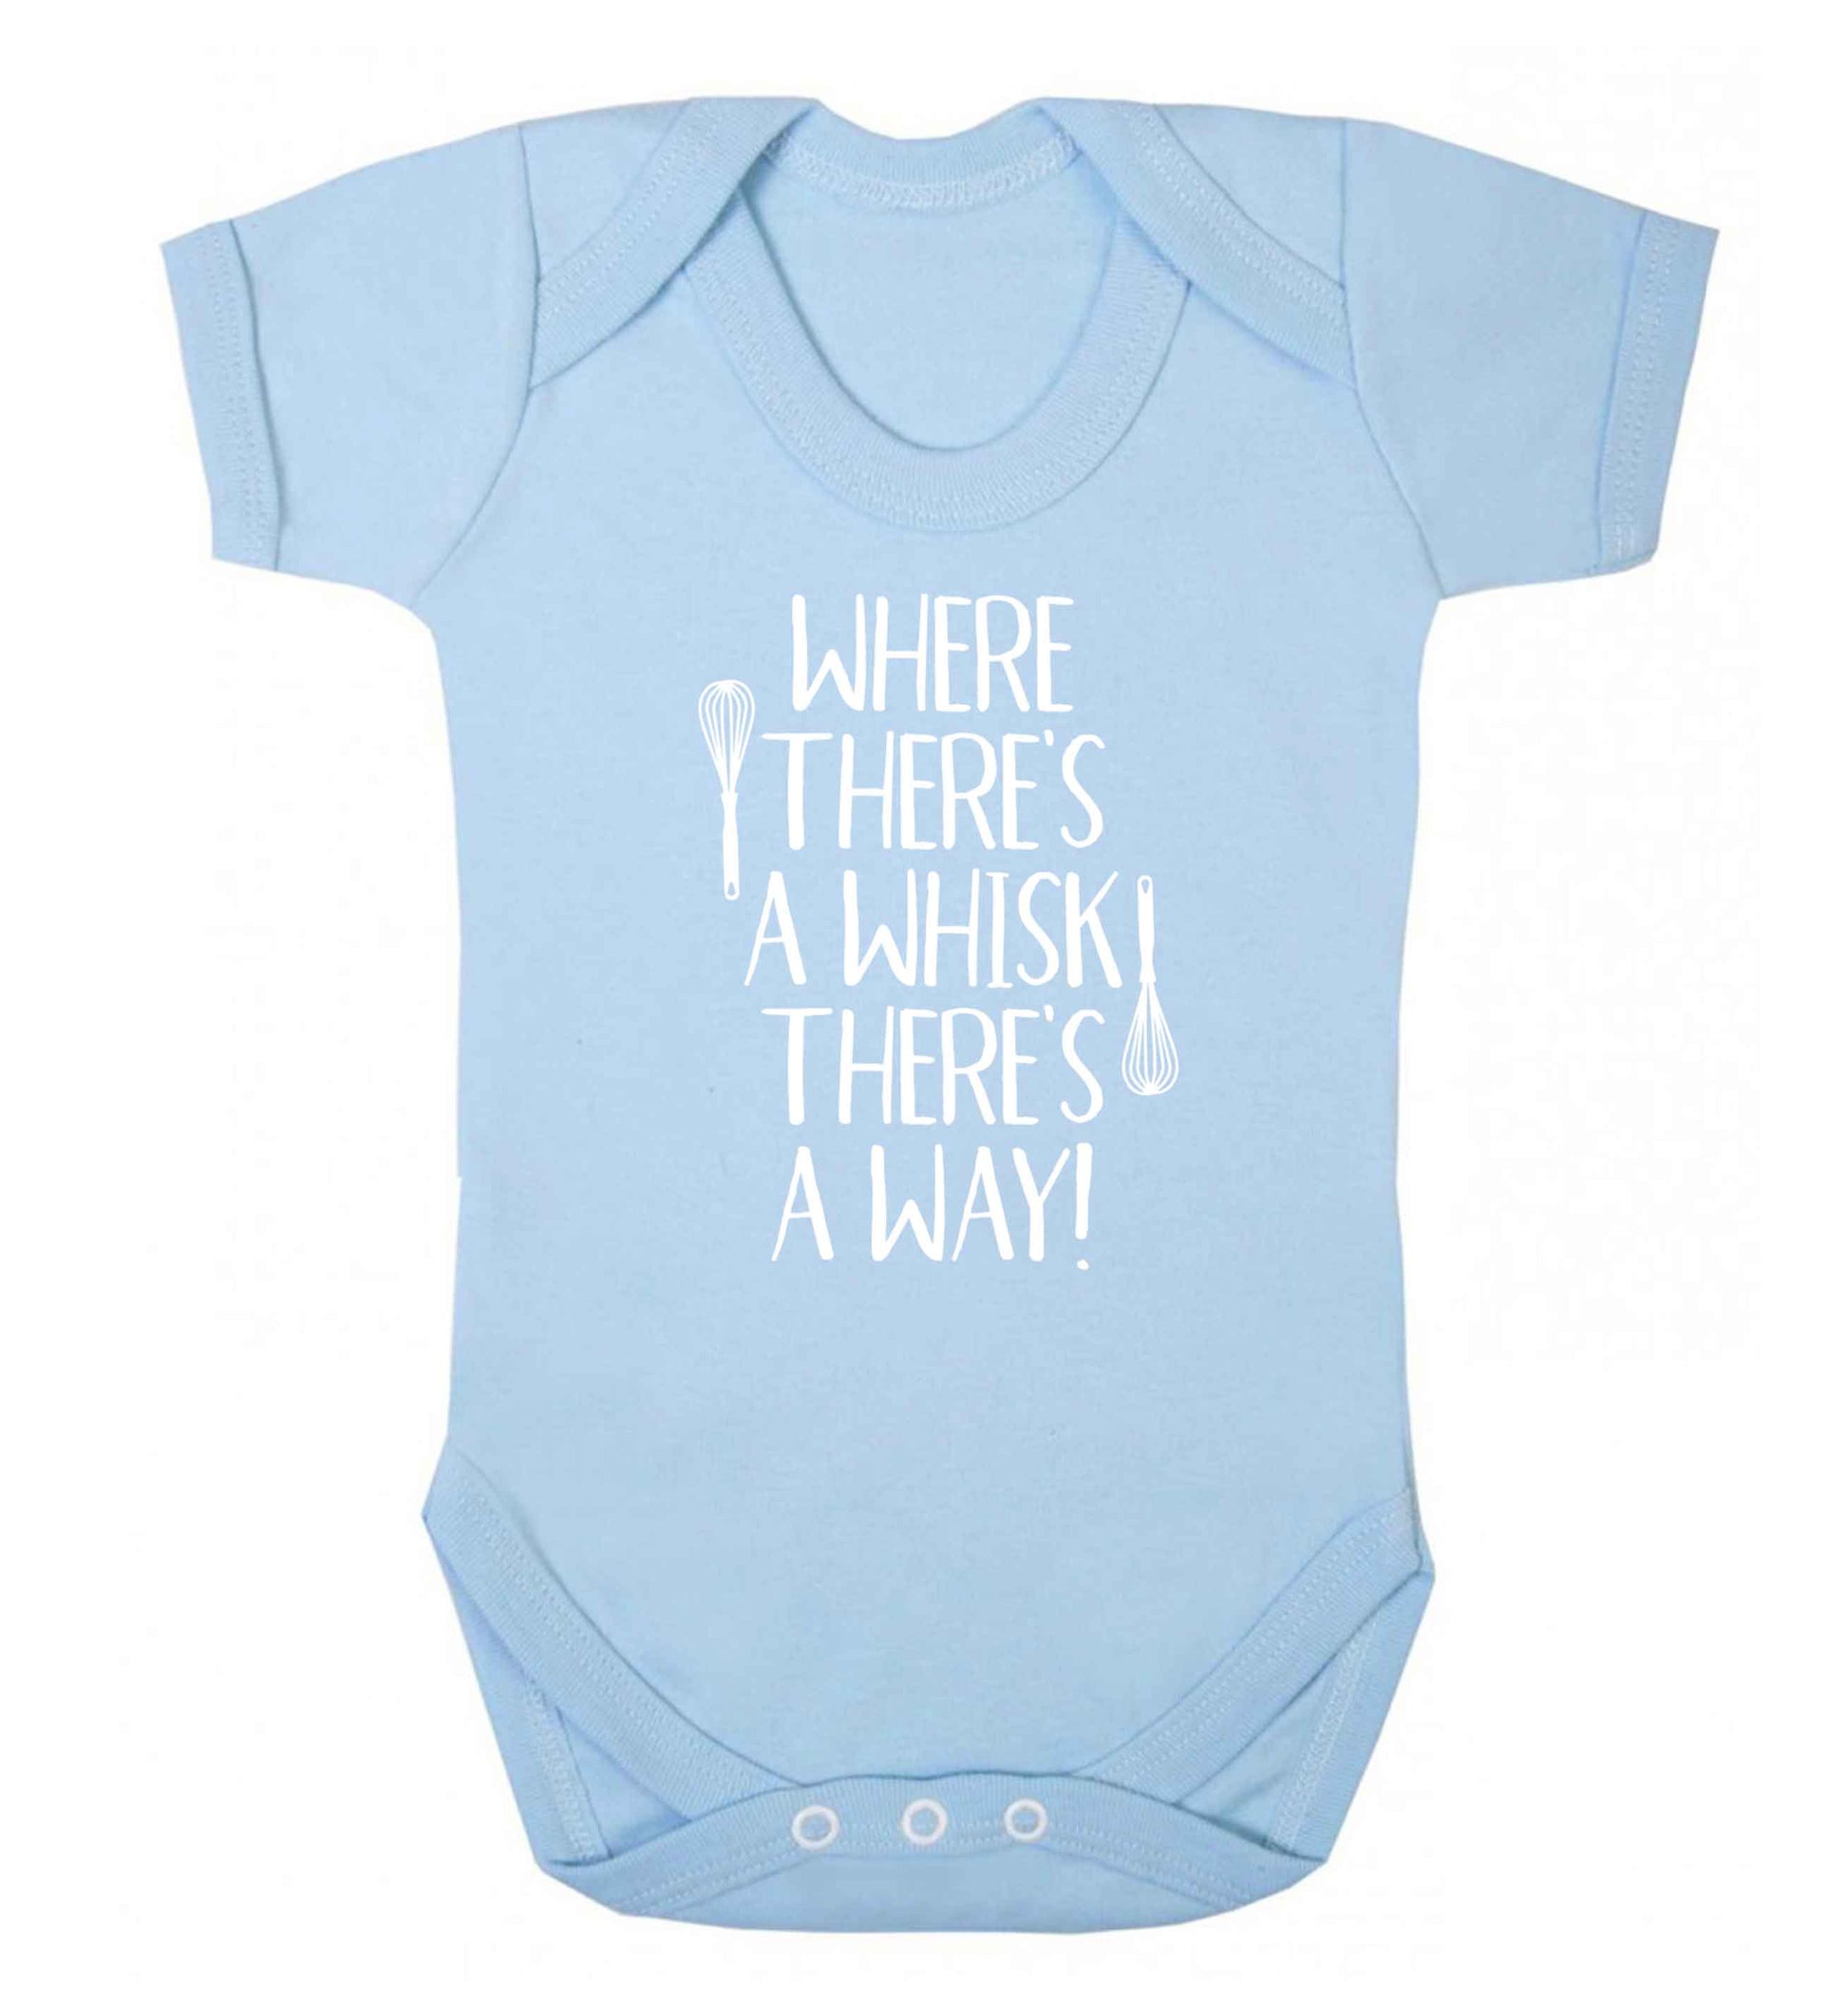 Where there's a whisk there's a way Baby Vest pale blue 18-24 months